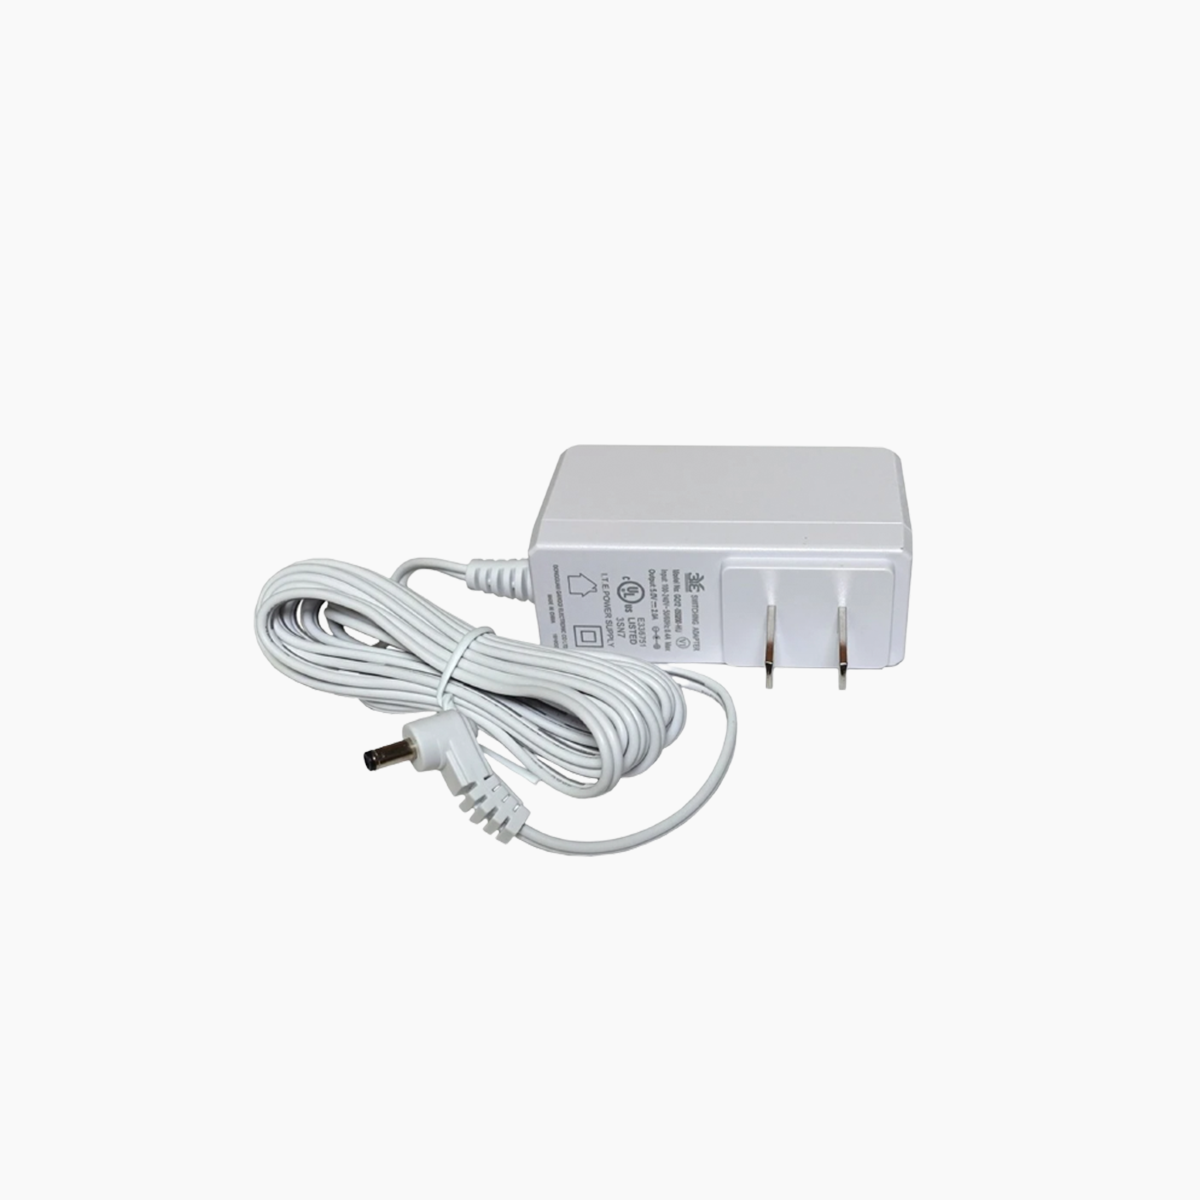 Replacement - AC Power Adapter (White) for PhotoSpring 10.1" and PhotoSpring 8 Digital Photo Frame Album